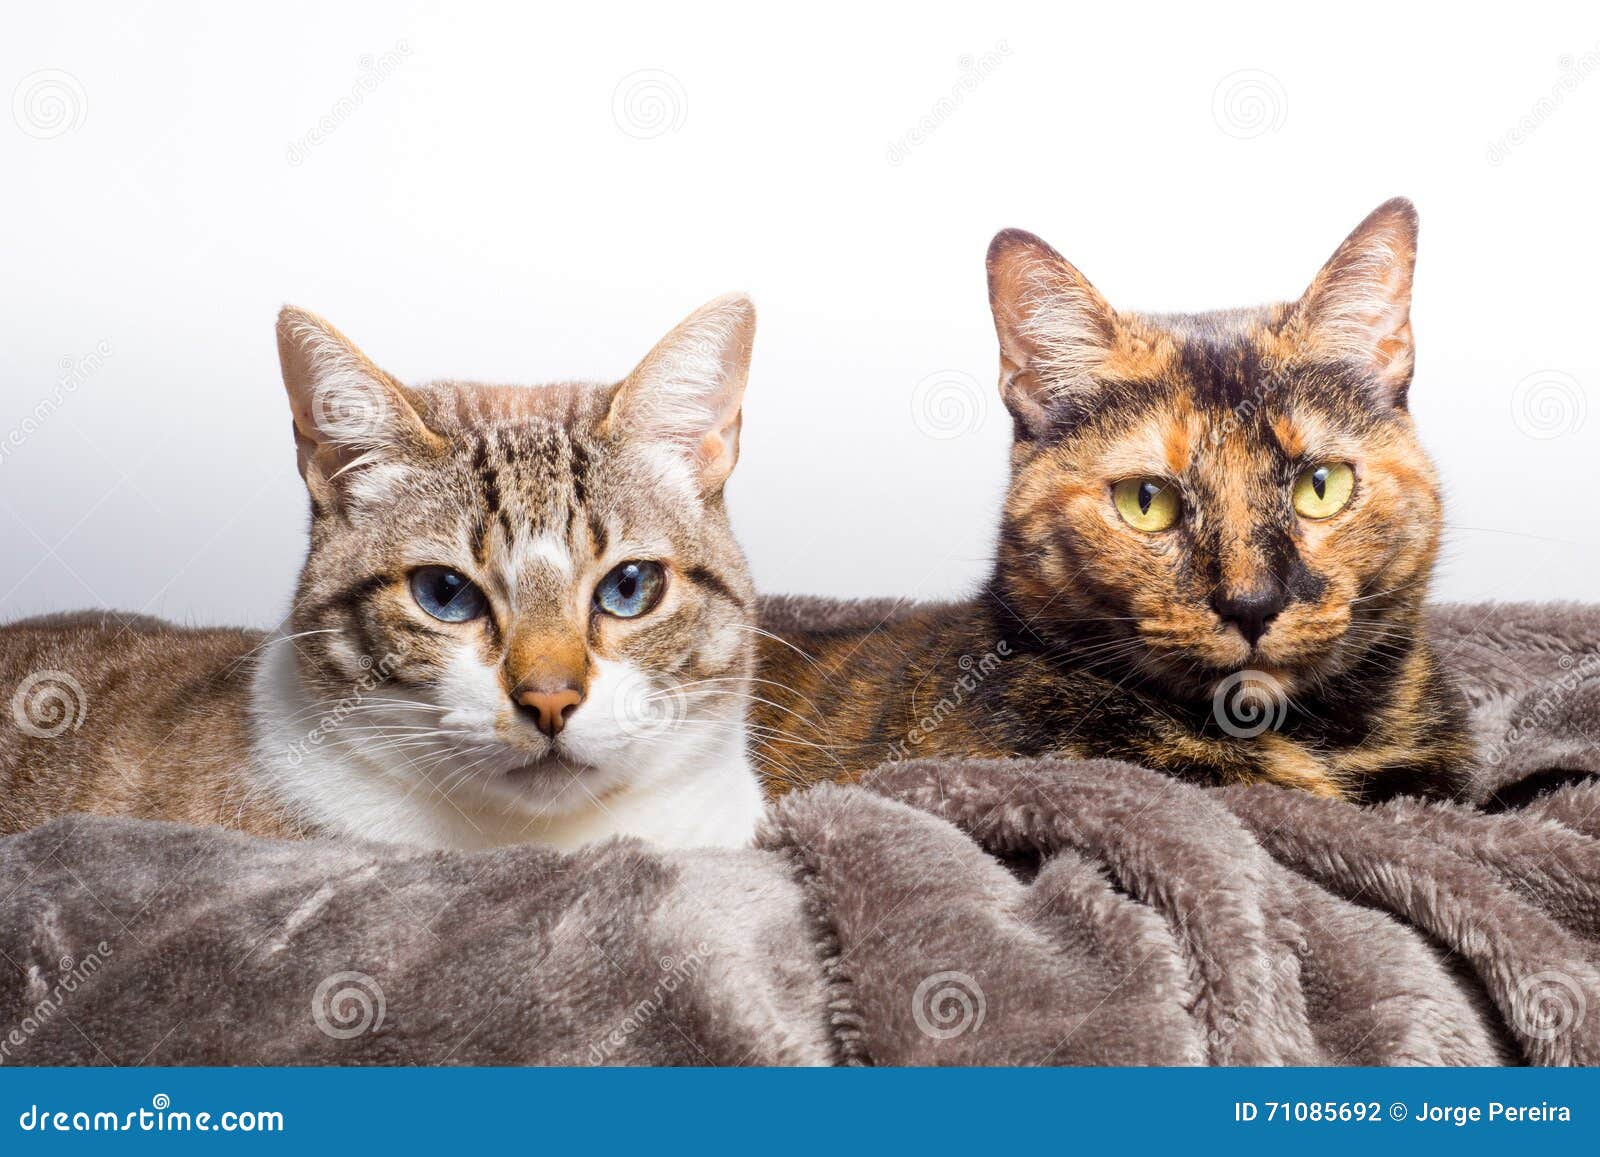 Two cute cats staring stock photo. Image of pair, cats - 71085692